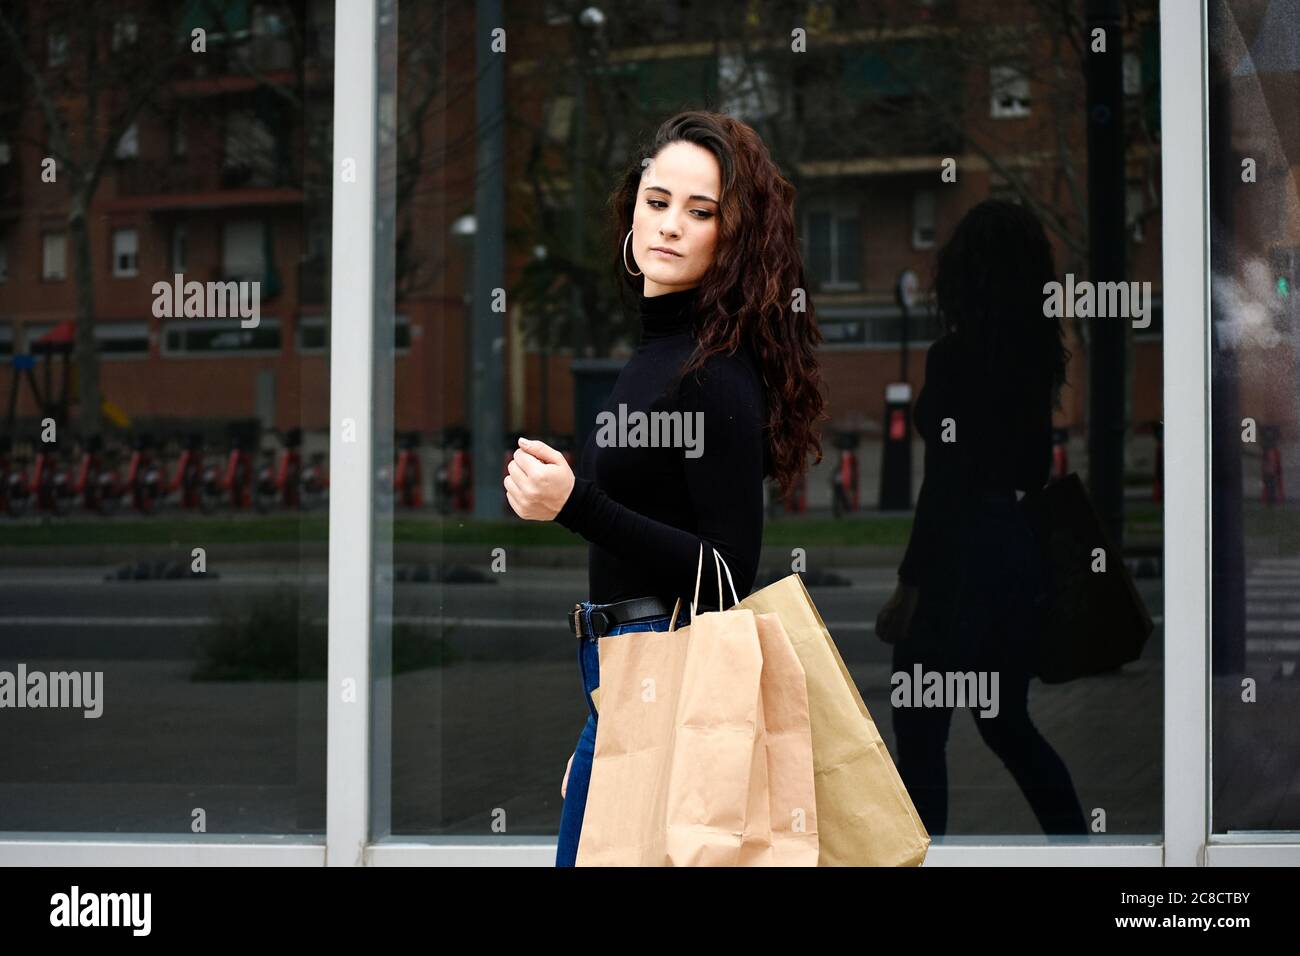 Fashion portrait woman with shopping bags wearing black while walking in the street Stock Photo